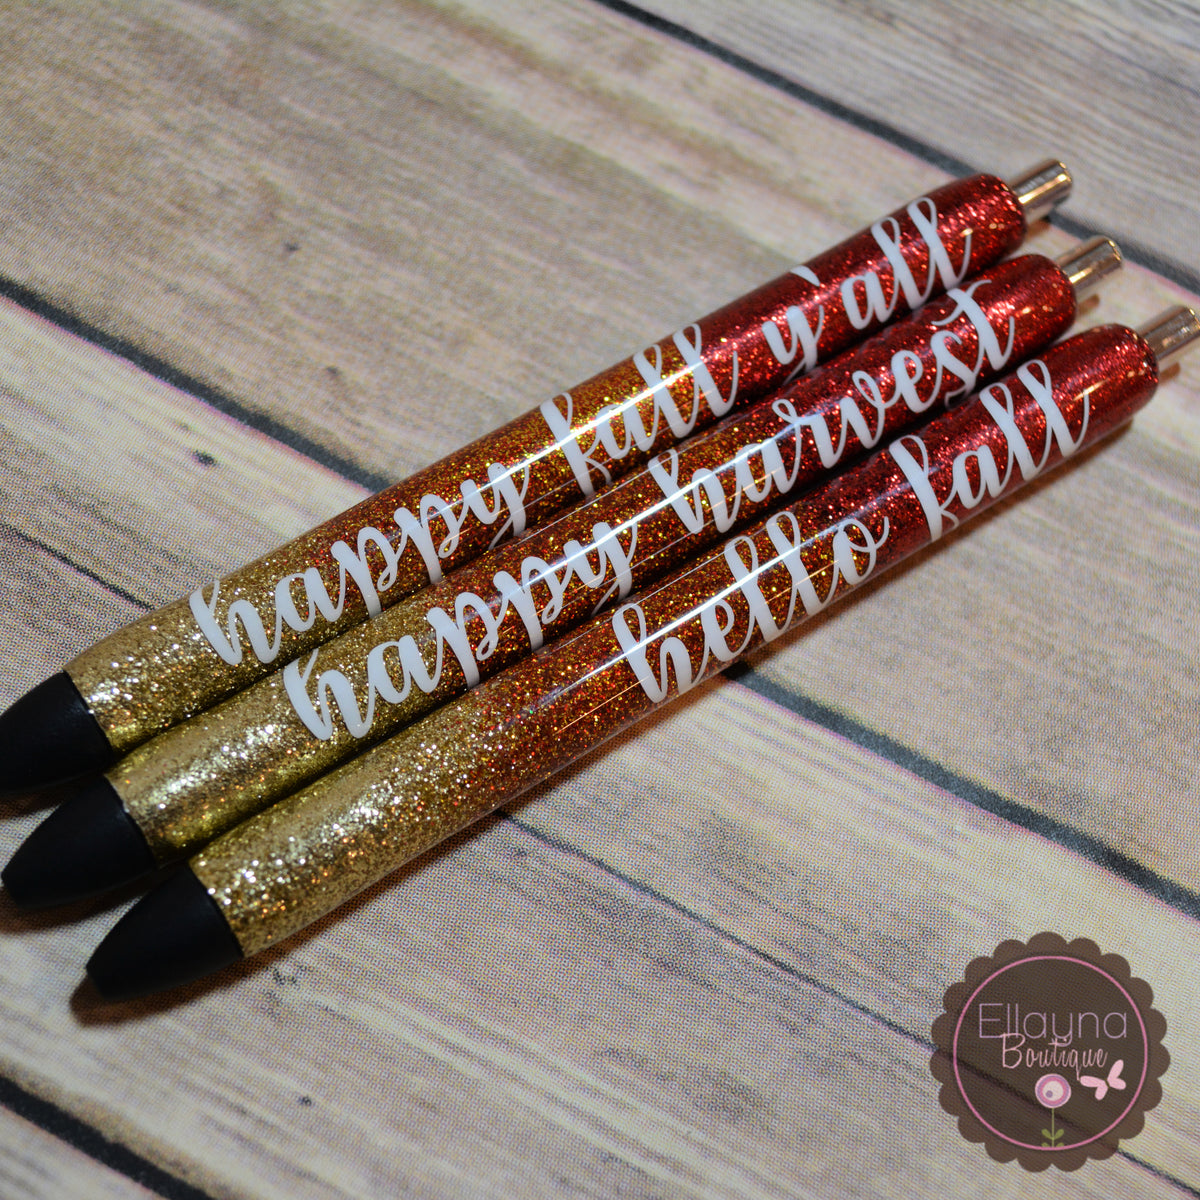 Be Gorgeous Anodized Glitter Rainbow Pen – Honey Bee Stamps